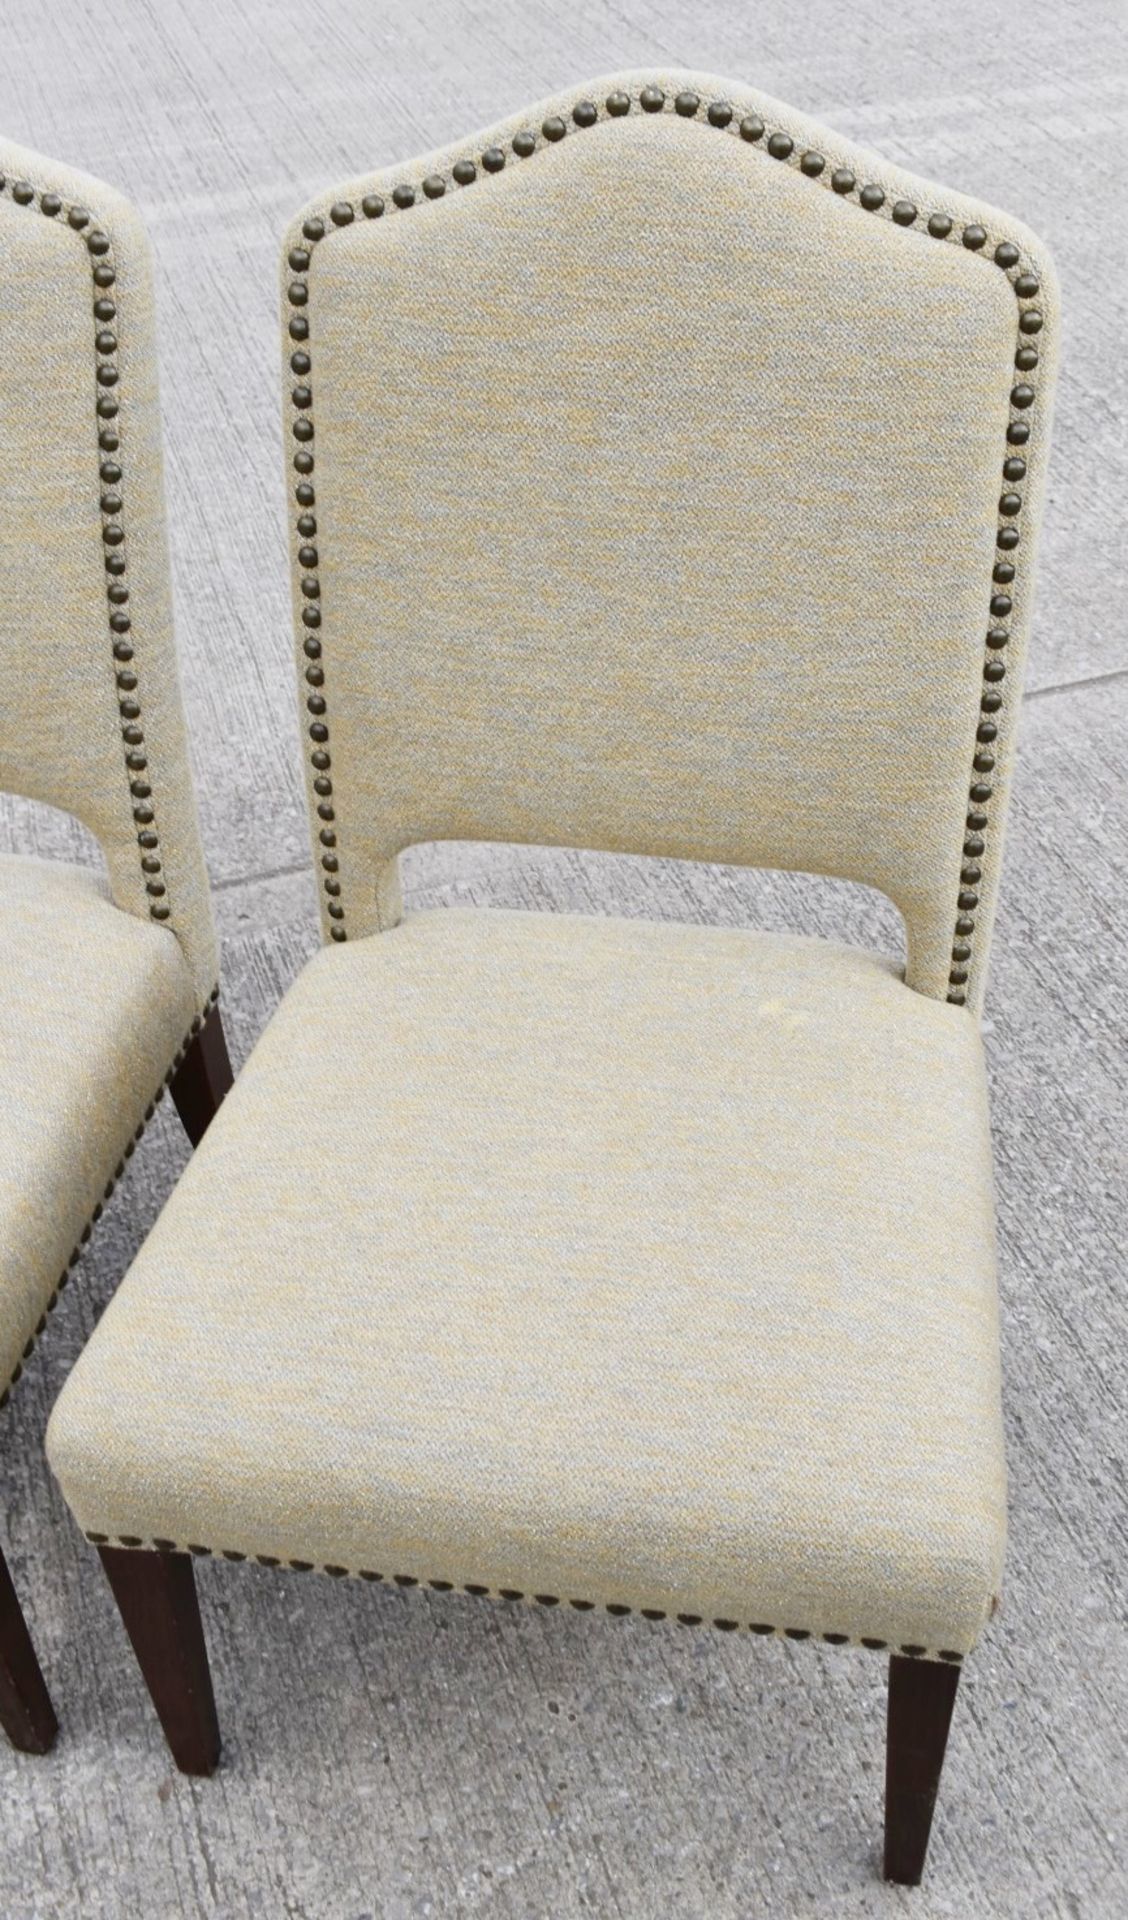 Pair Of Finely Crafted Studded Chairs Upholstered in a Premium Woven Fabric with Wooden Legs - - Image 2 of 3